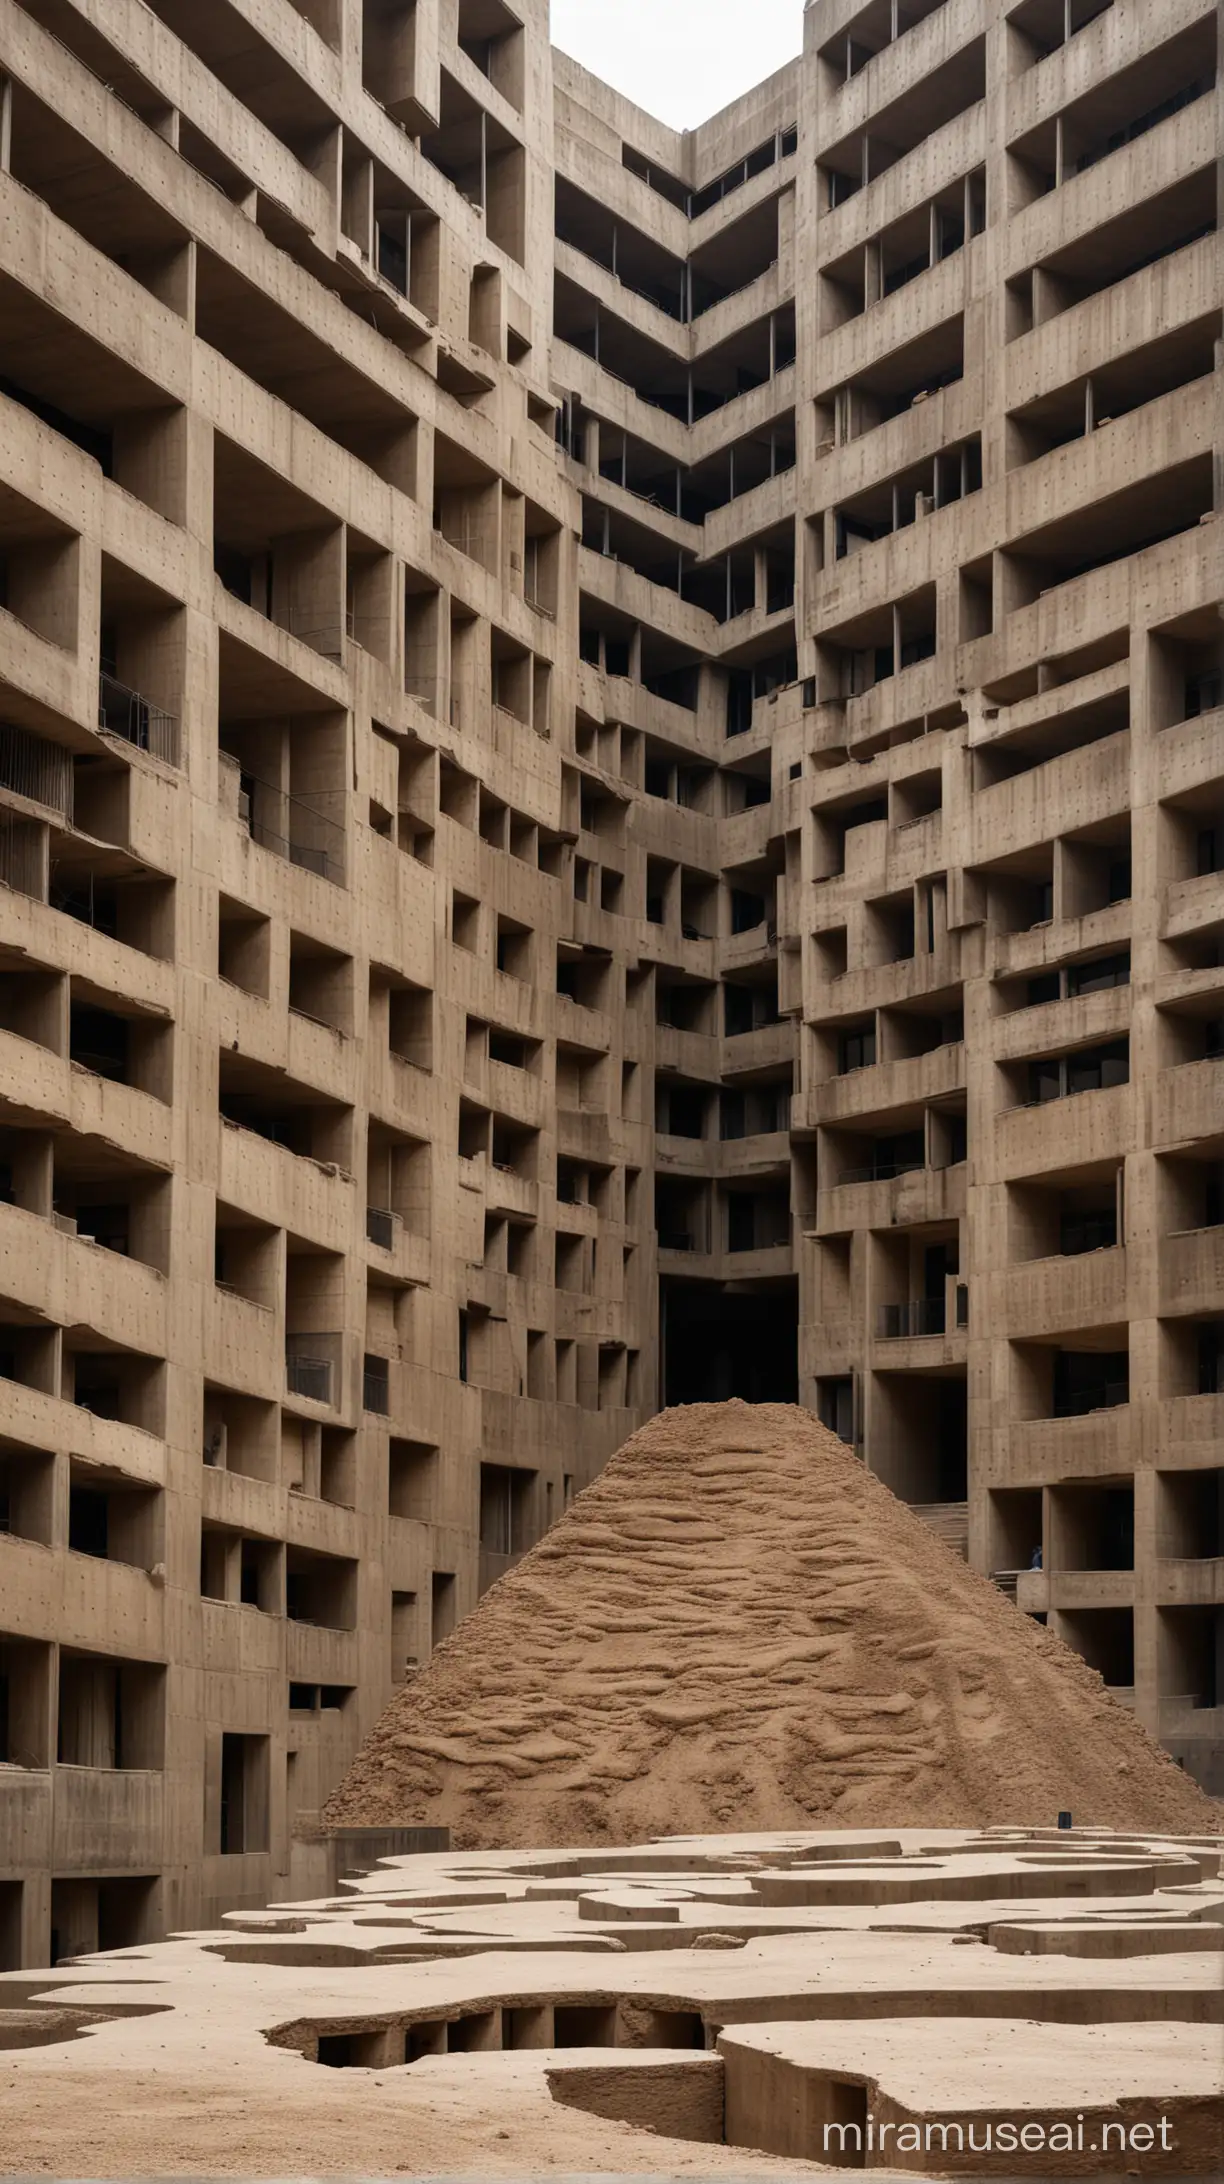 Brooding Abstract Structure Massive Building with Unstructured Concrete and Rammed Earth Surroundings